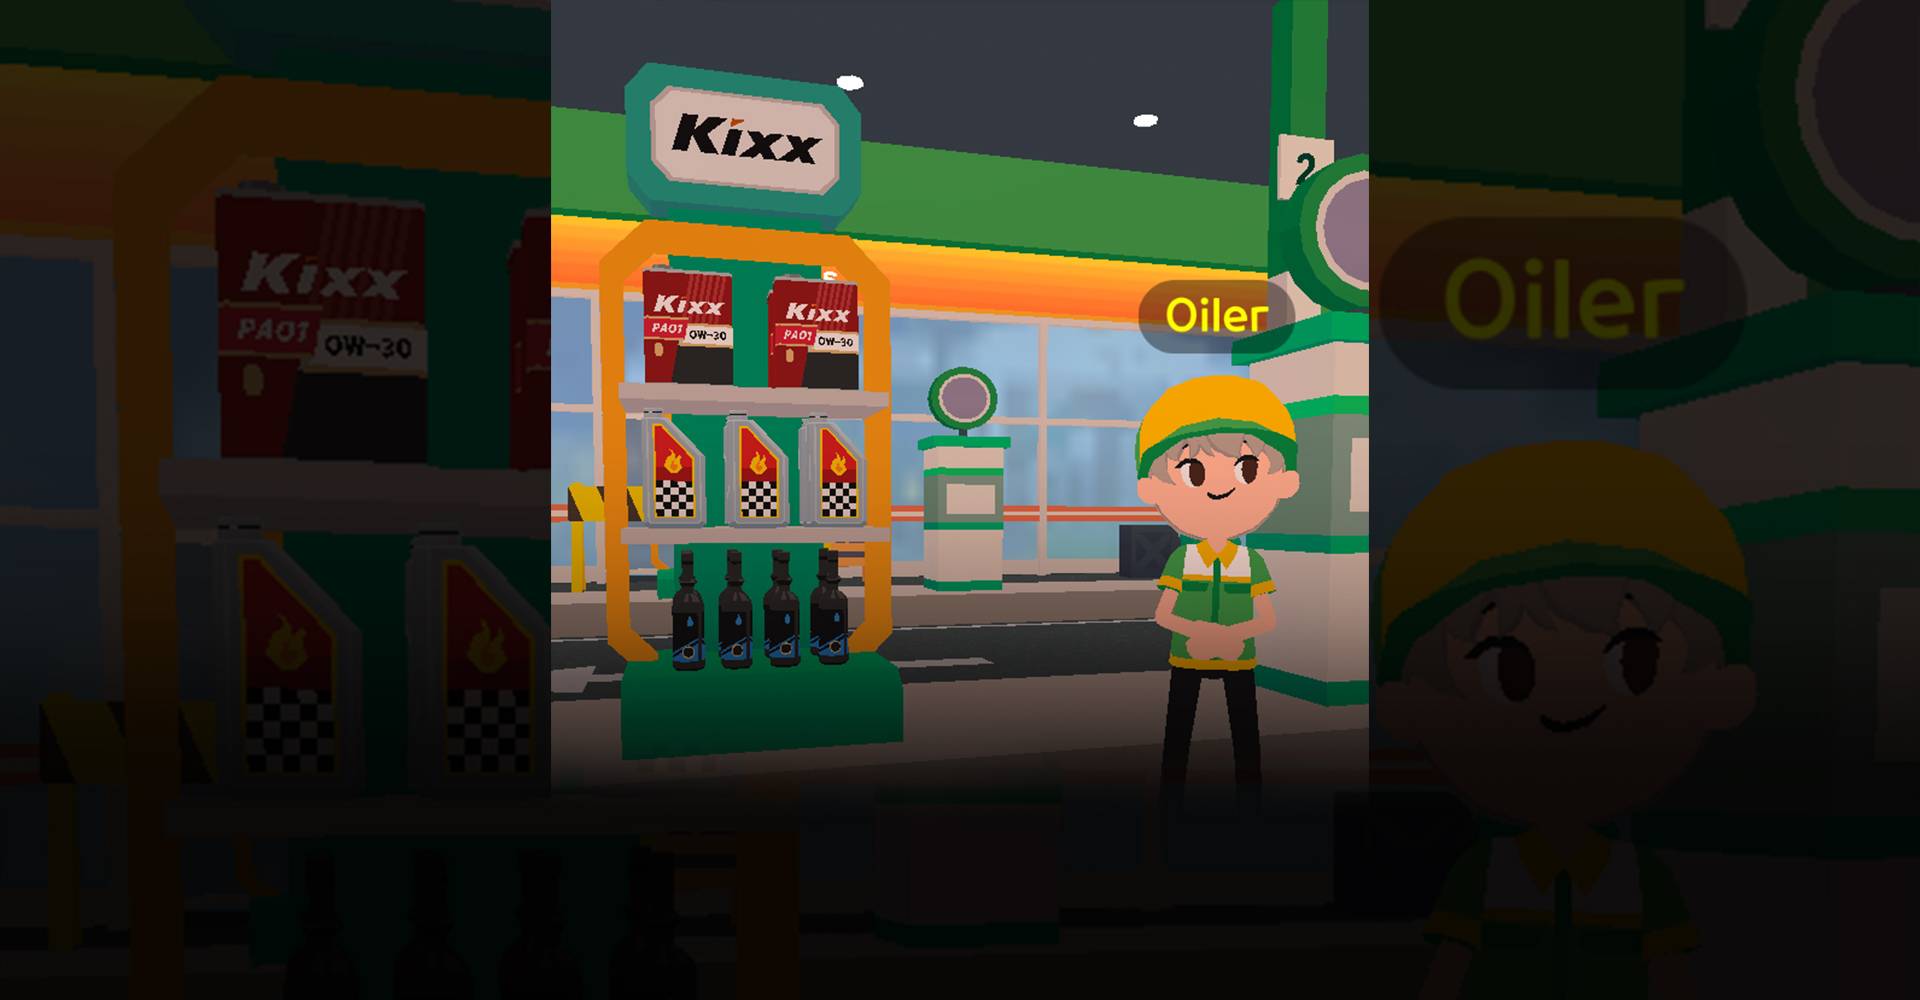 Kixx Engine Oil Featured In Metaverse Game ‘Play Together’